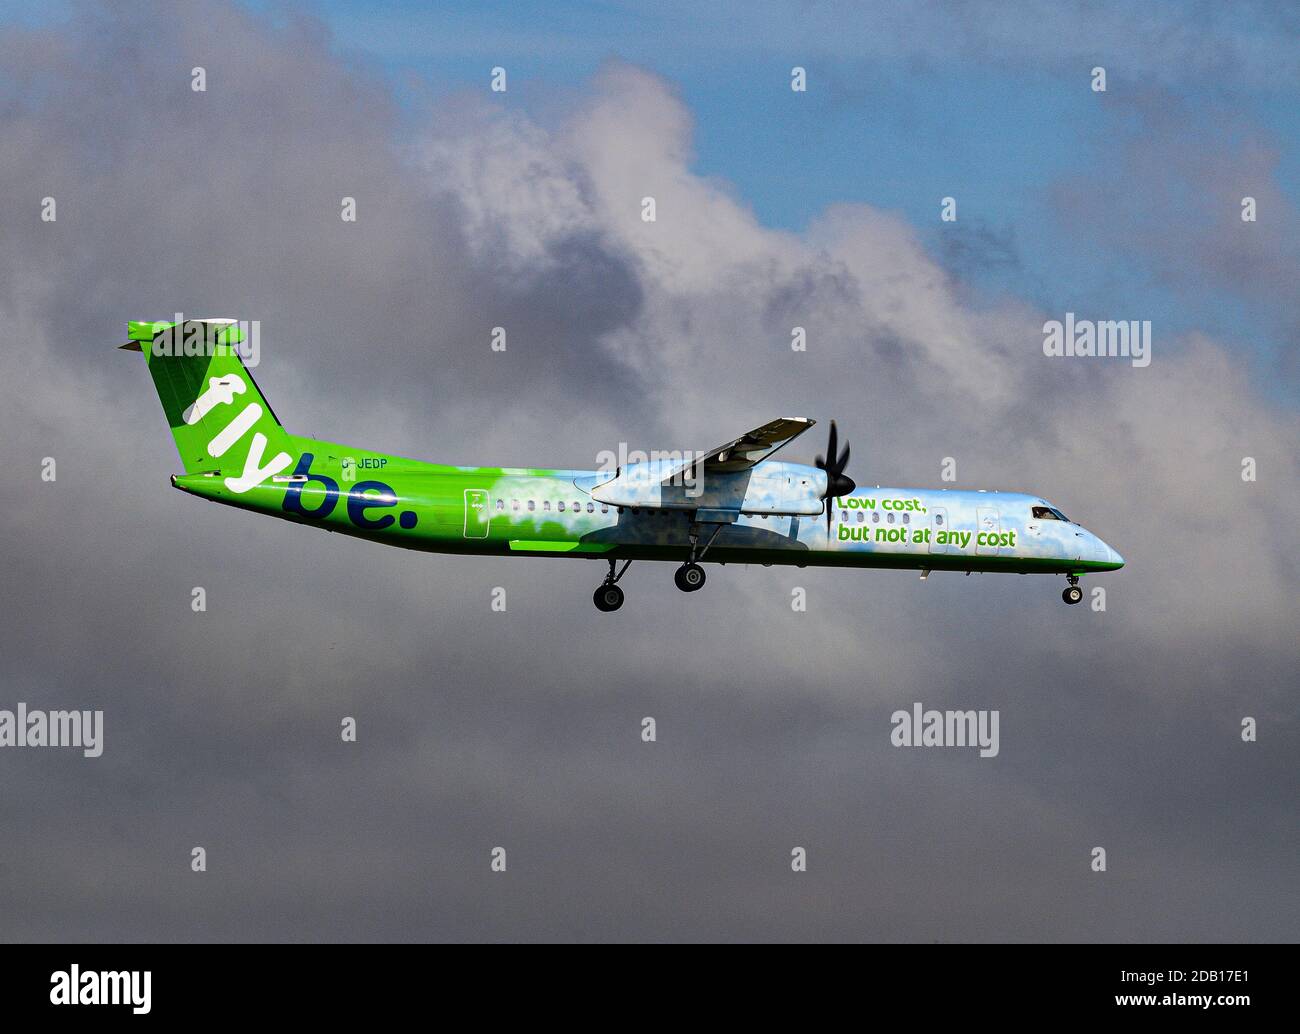 A Dehavilland DCH-8-402q turbo prop airliner G-JEDP from Flybe in its pre 2014 paint scheme colours. Stock Photo